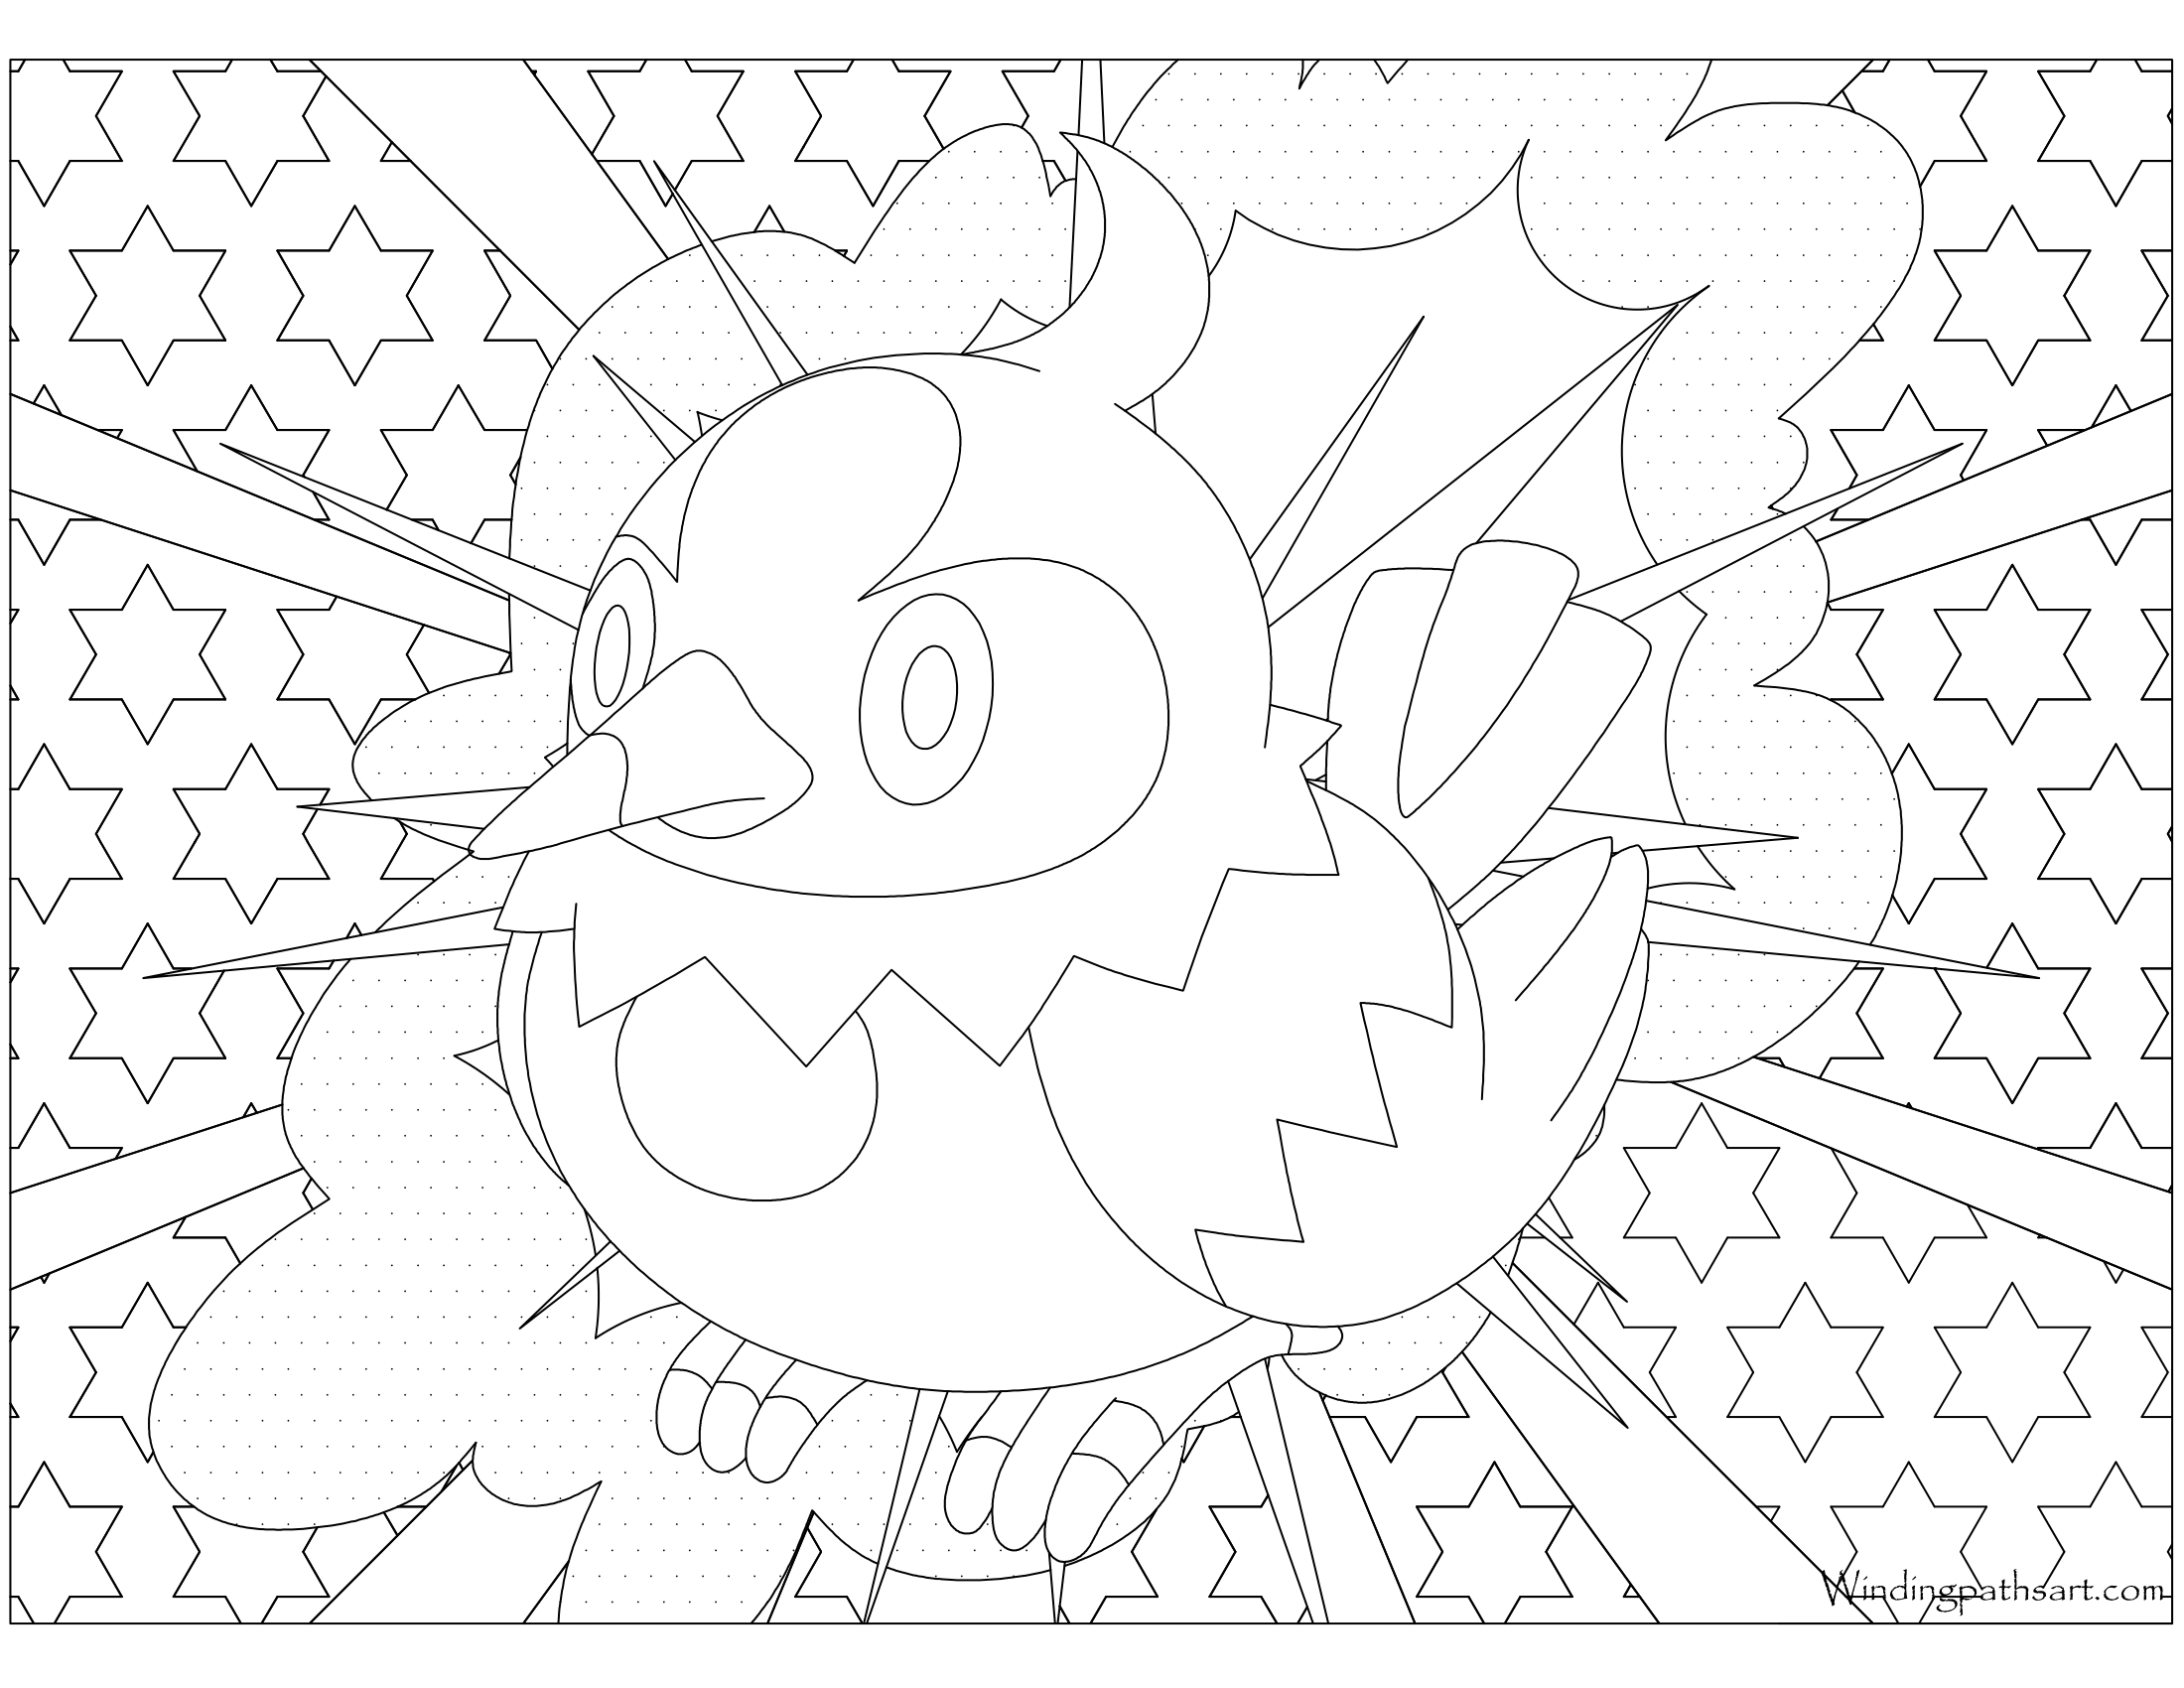 #396 Starly Pokemon Coloring Page